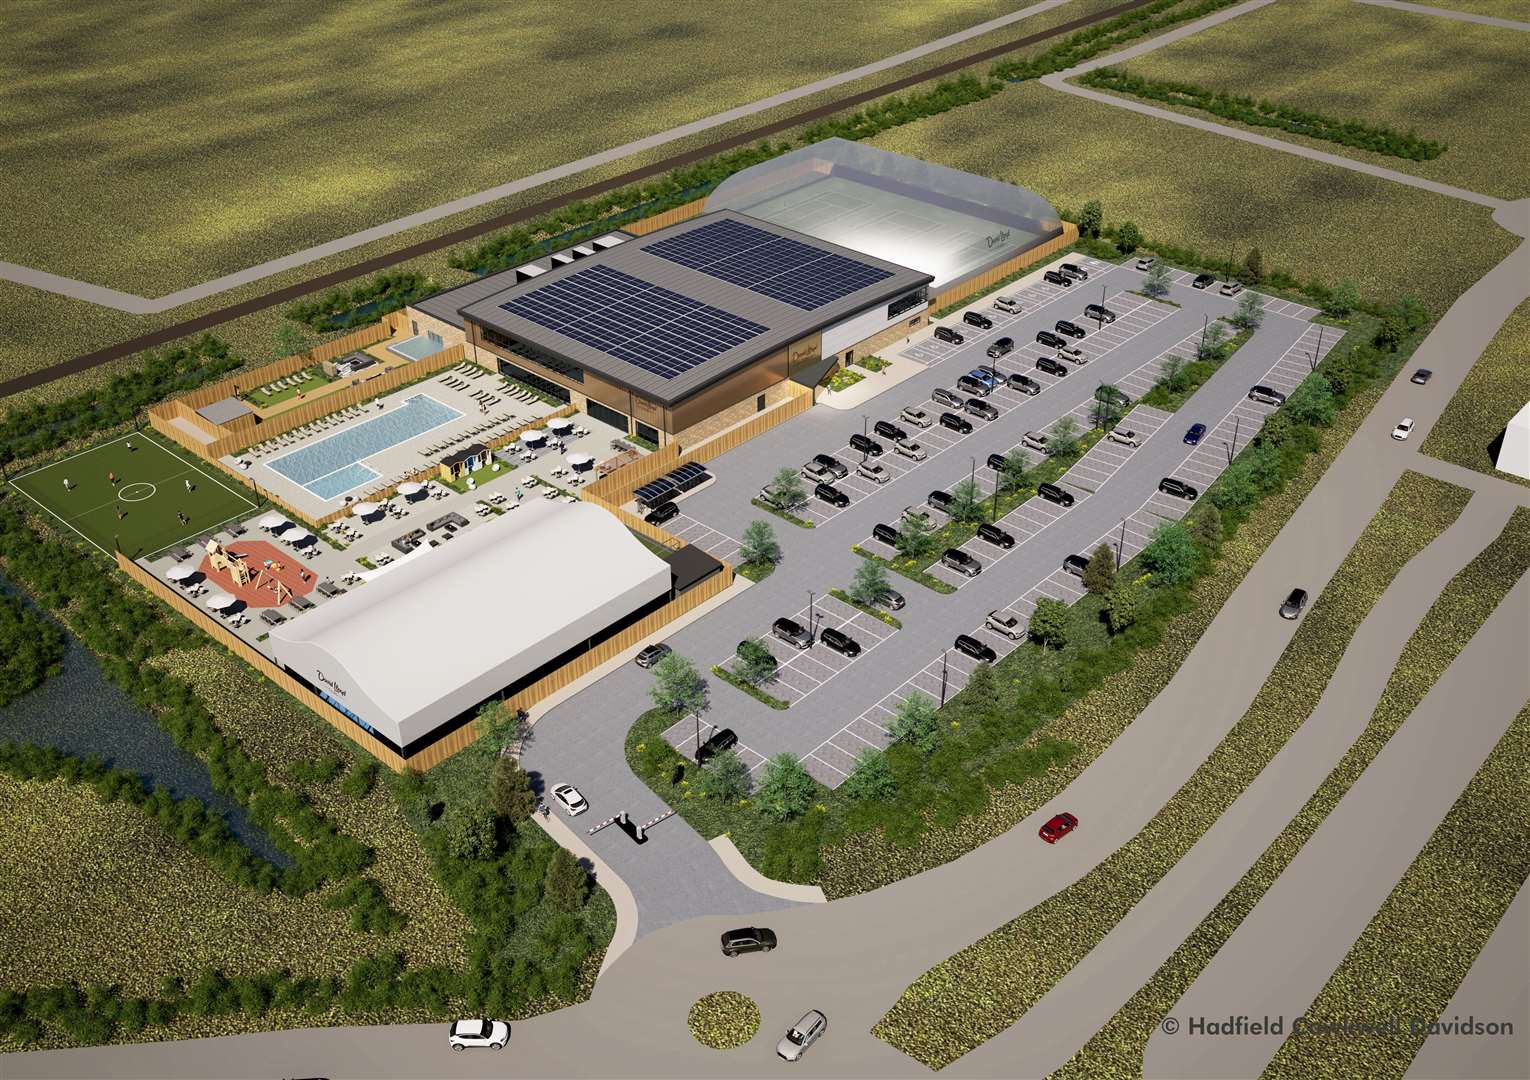 What the new David Lloyd gym and leisure centre in Herne Bay could look like. Picture: David Lloyd Leisure